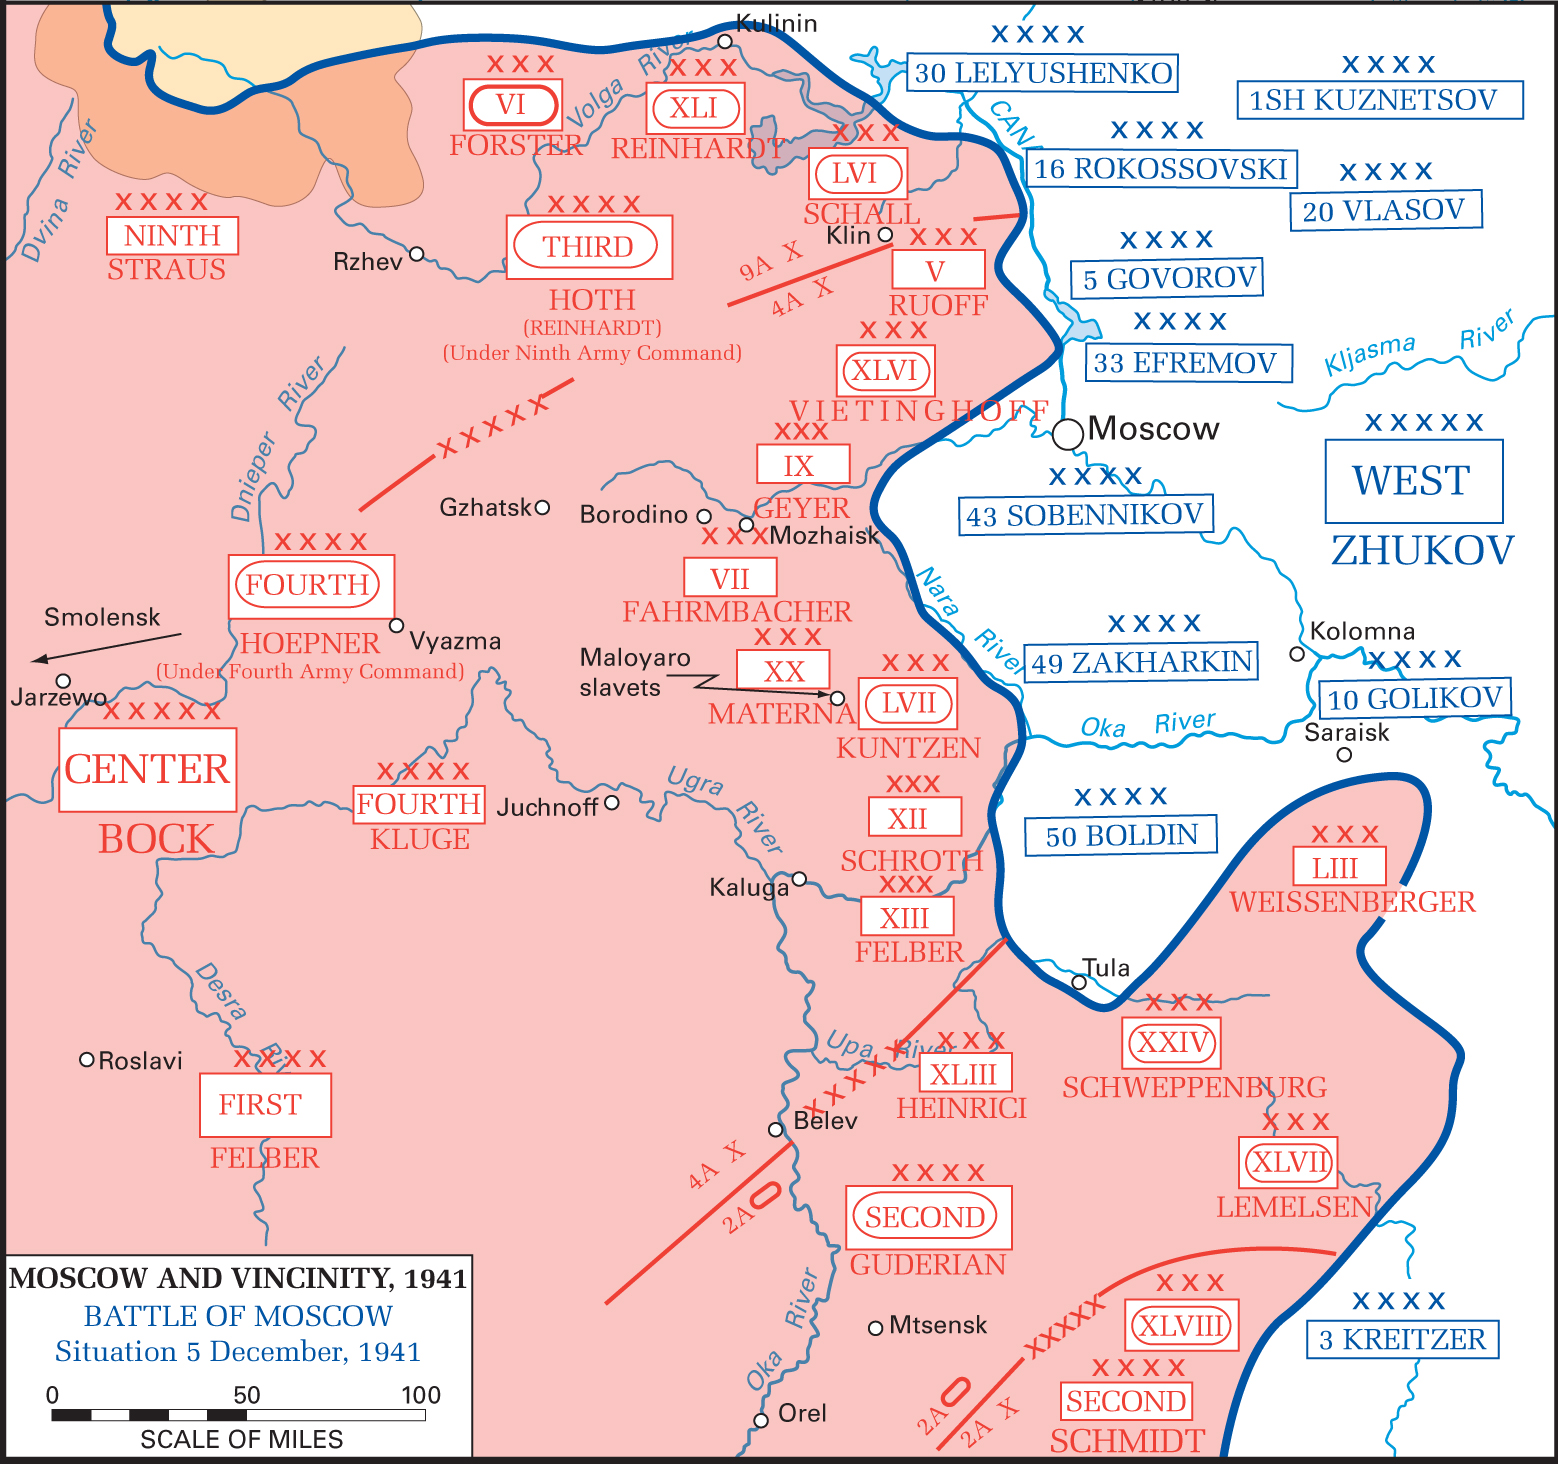 WWII - Moscow and Vicinity 1941: Battle of Moscow - Situation December 5, 1941